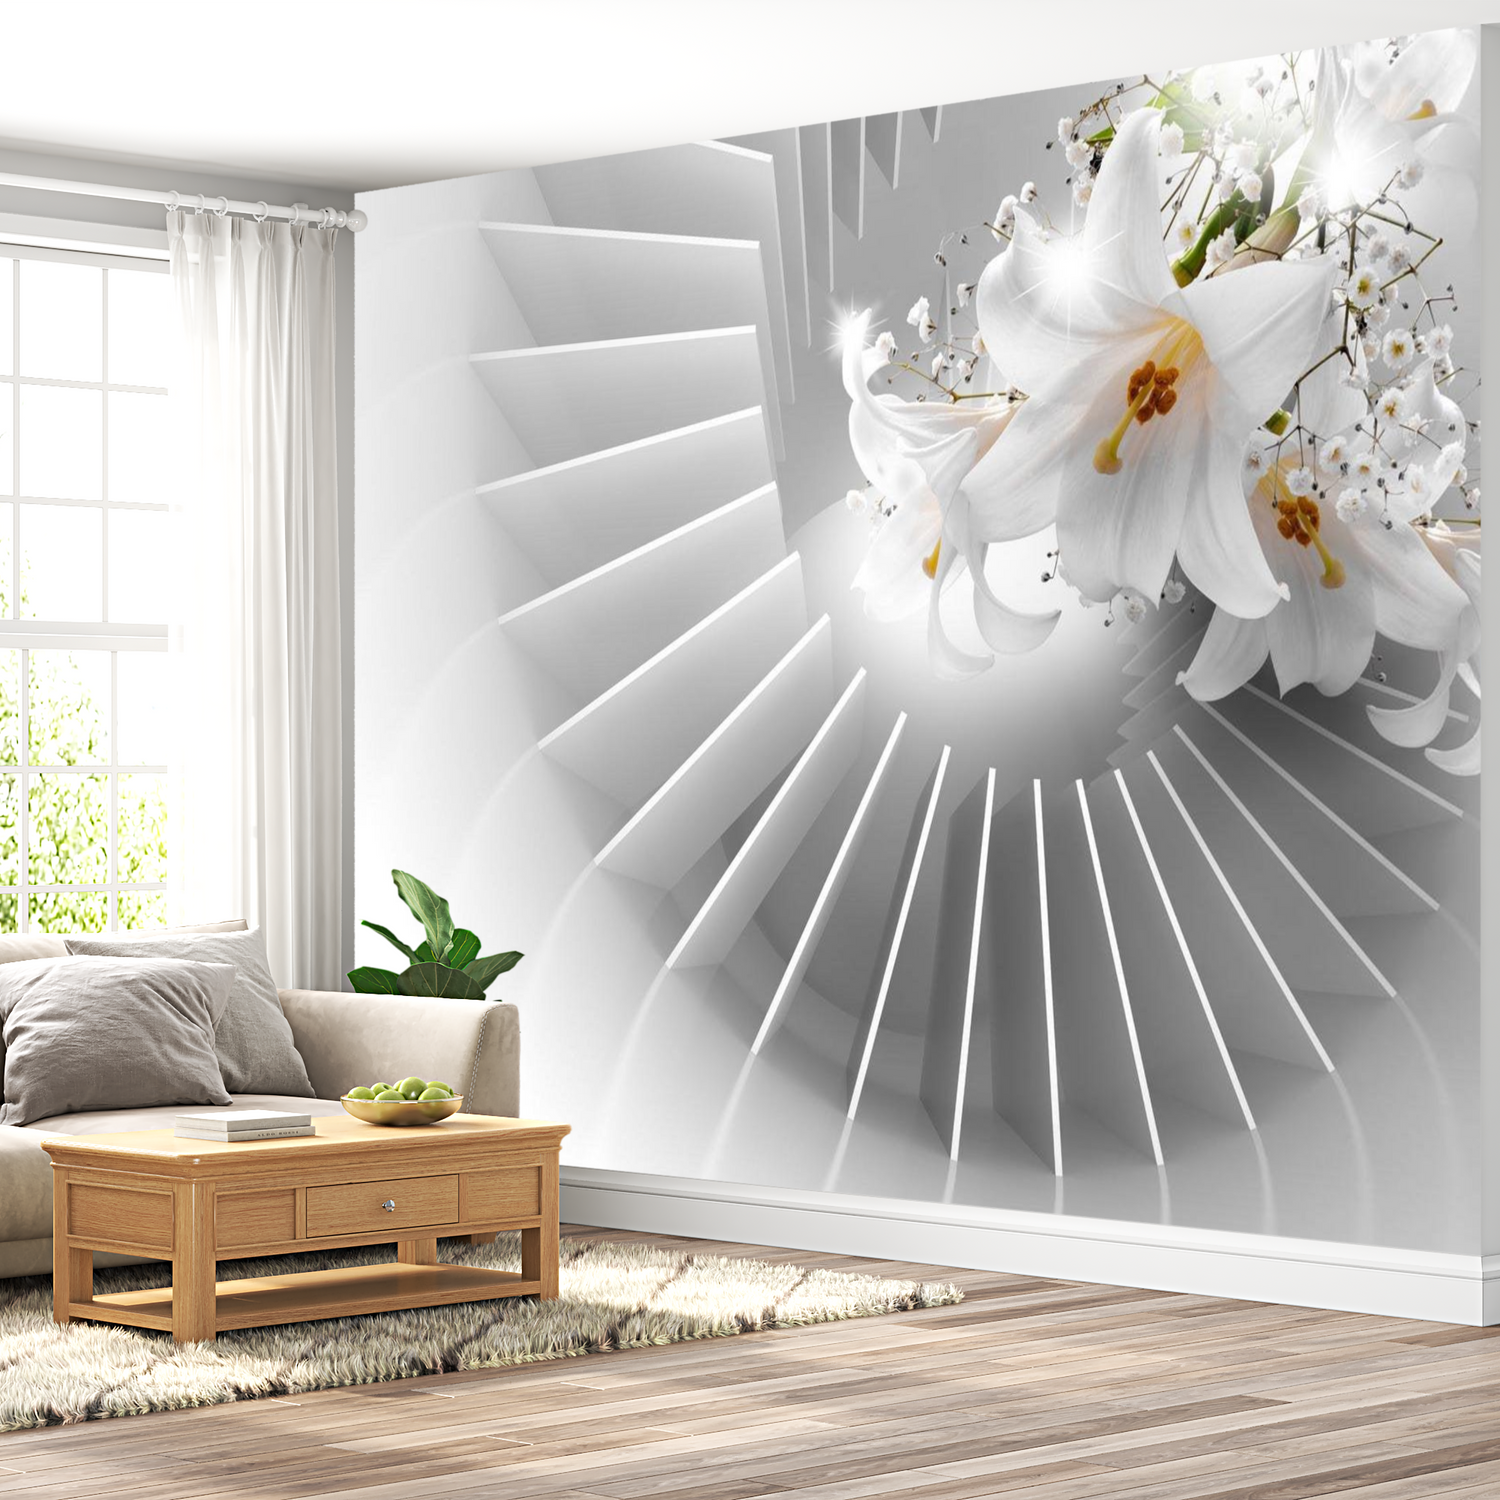 3D Illusion Wallpaper Wall Mural - Domino Effect 39"Wx27"H